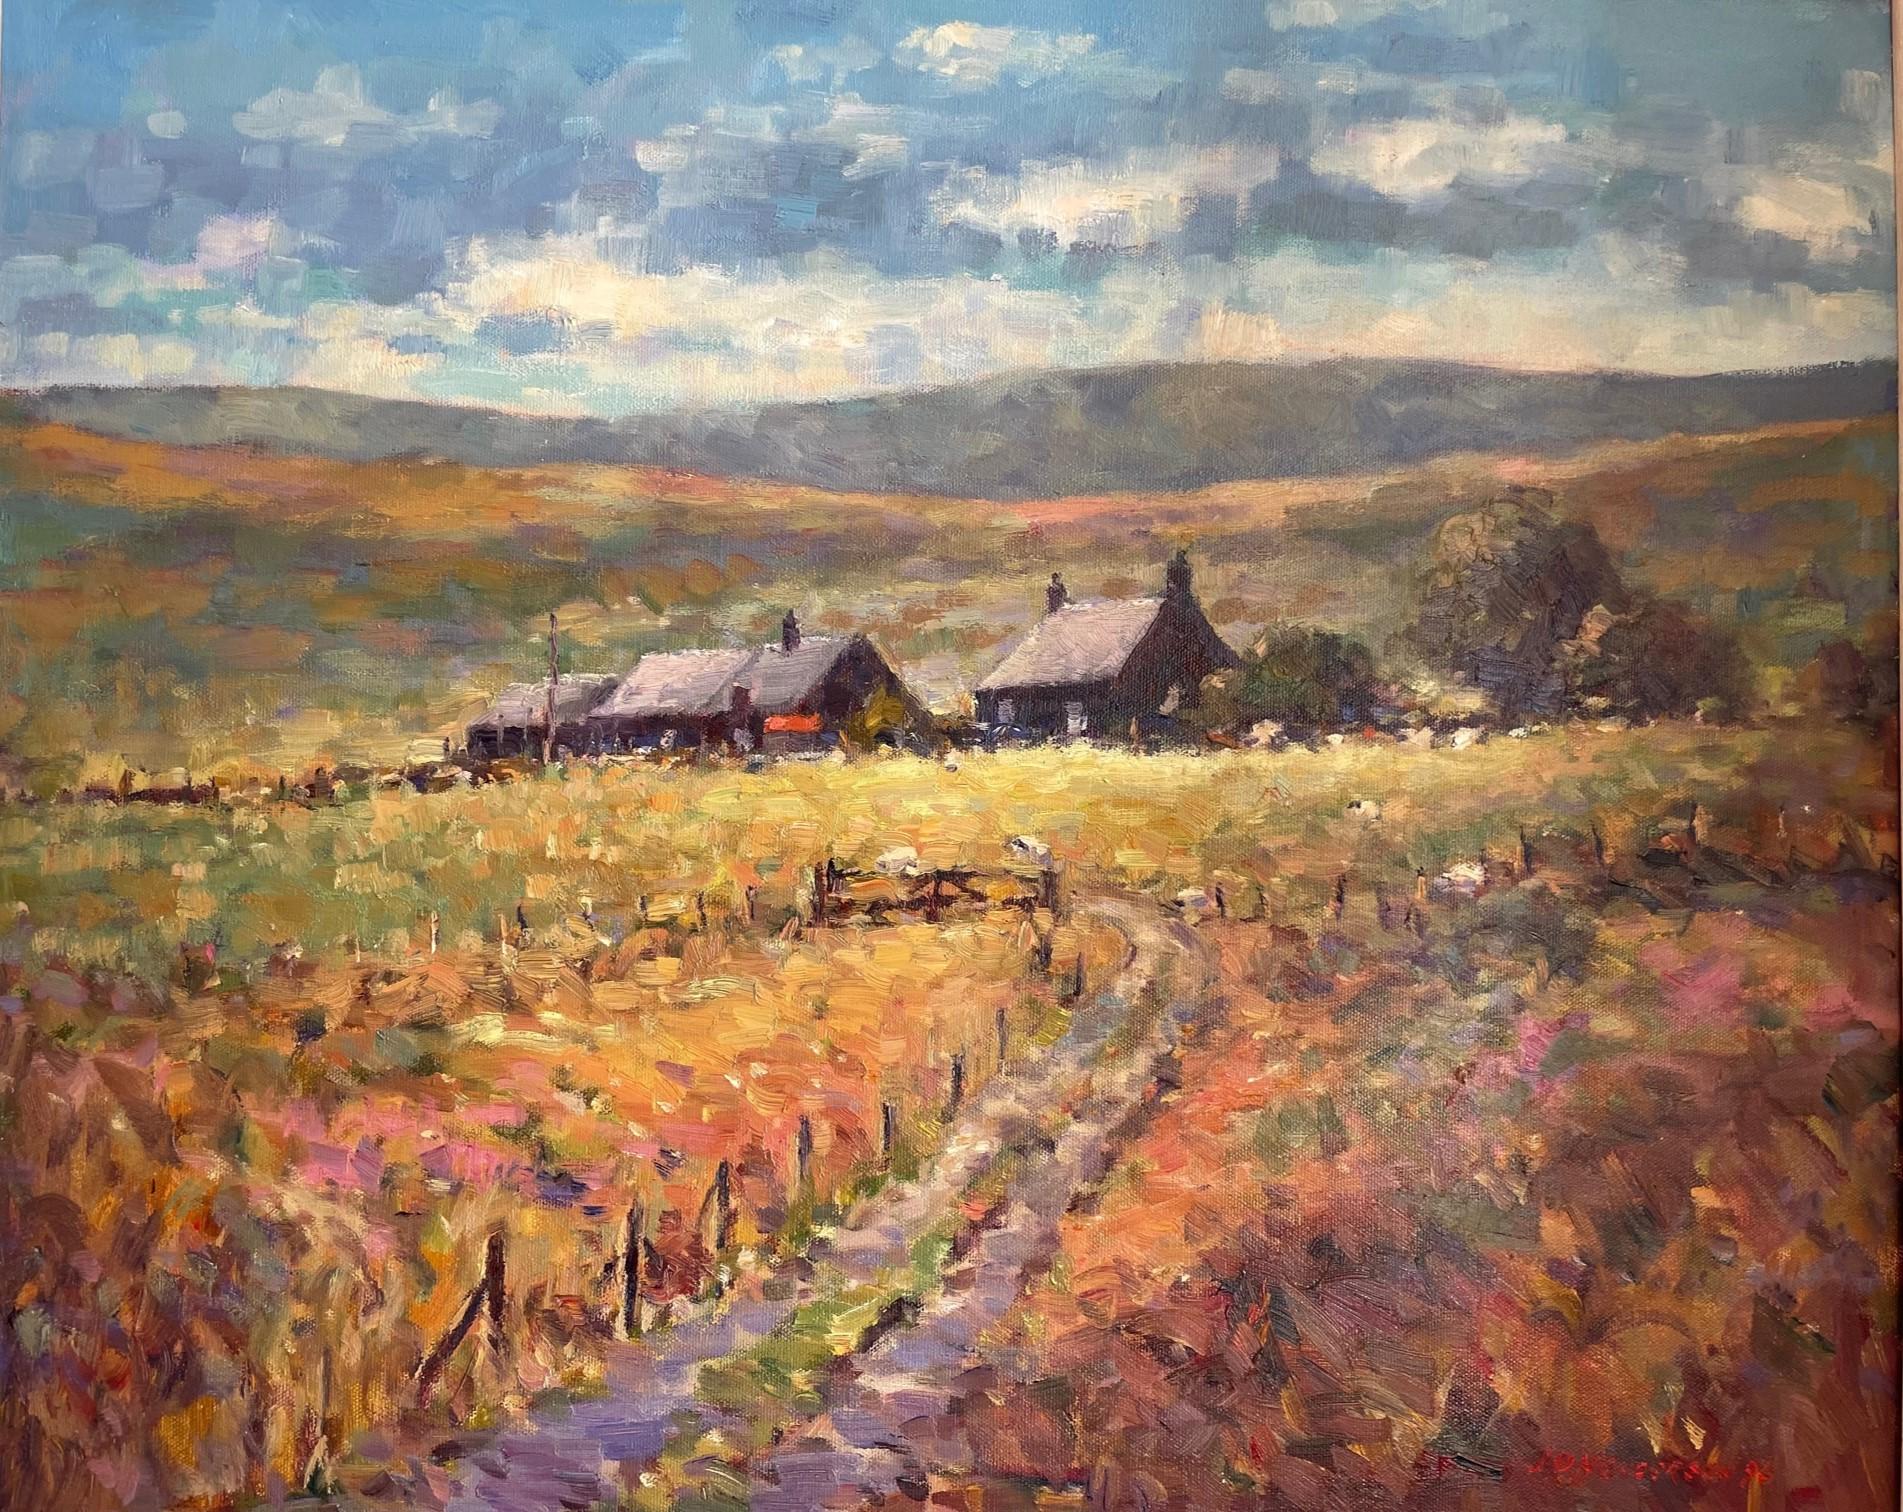 Middleton Farm, Comrie - Painting by JD Henderson